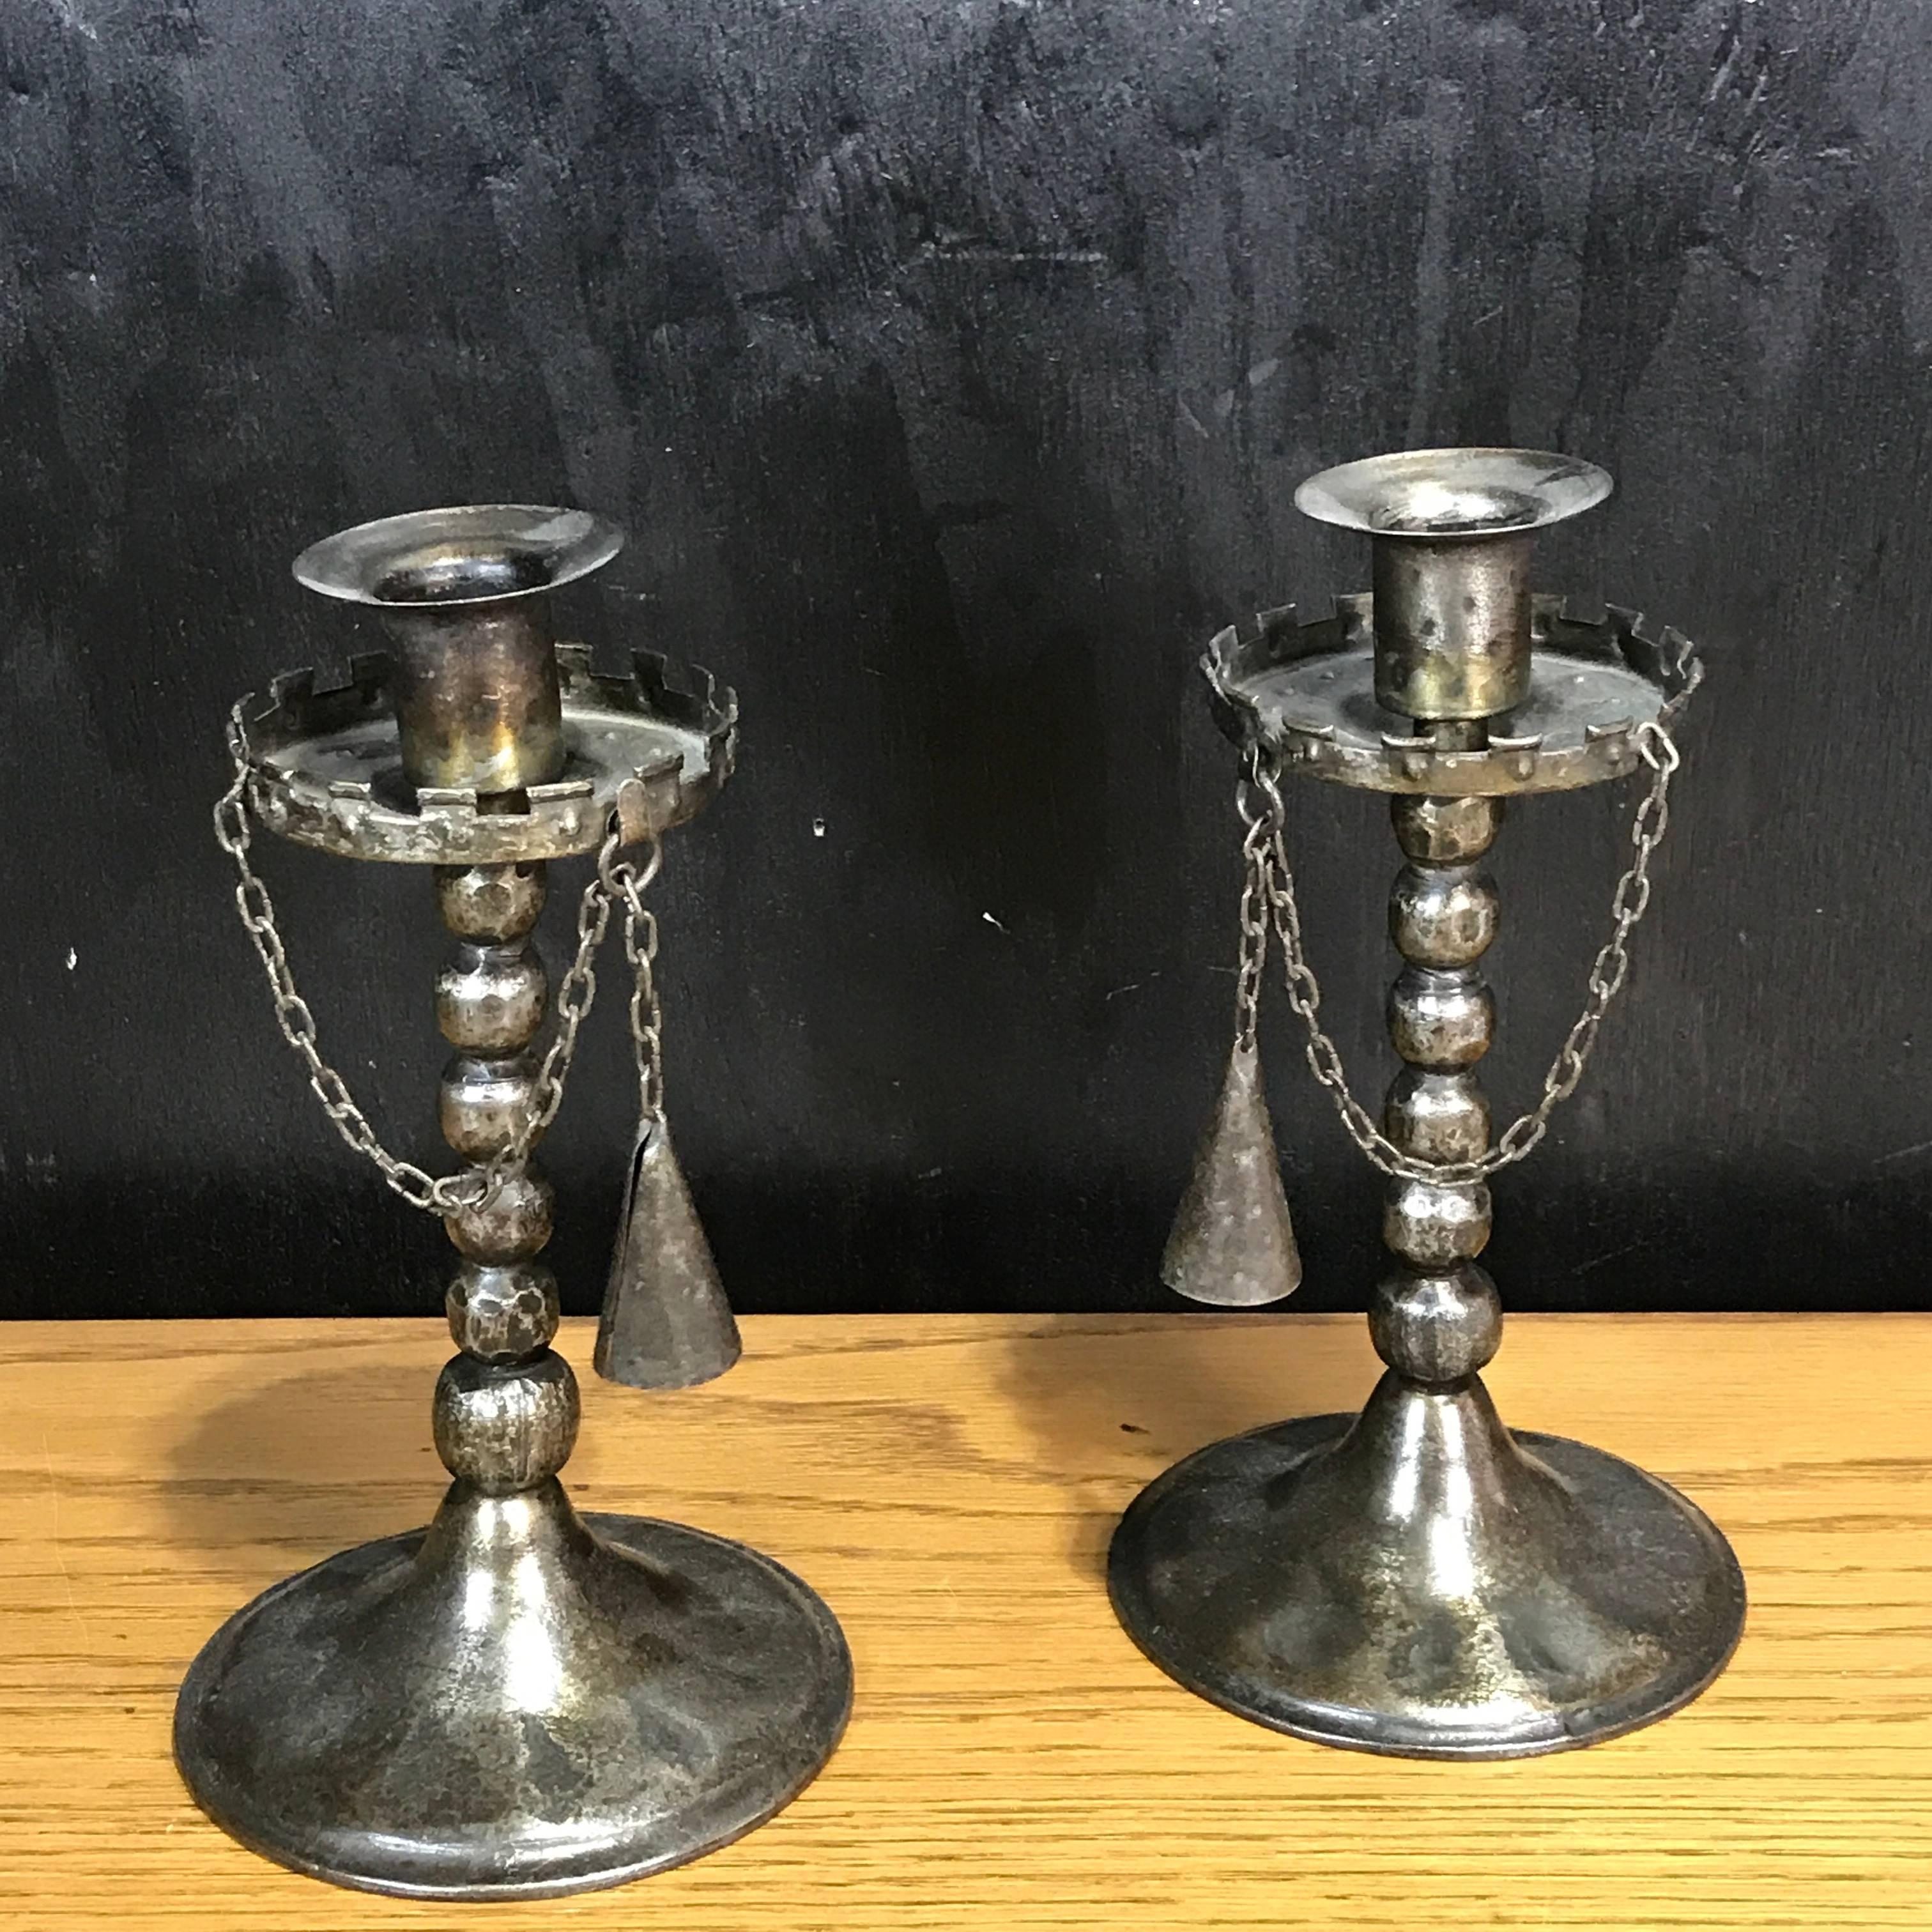 Pair of Gothic iron candlesticks with snuffers, each one with chained candlesnuffer, stamped Germany, known Goberg Metalworks form.